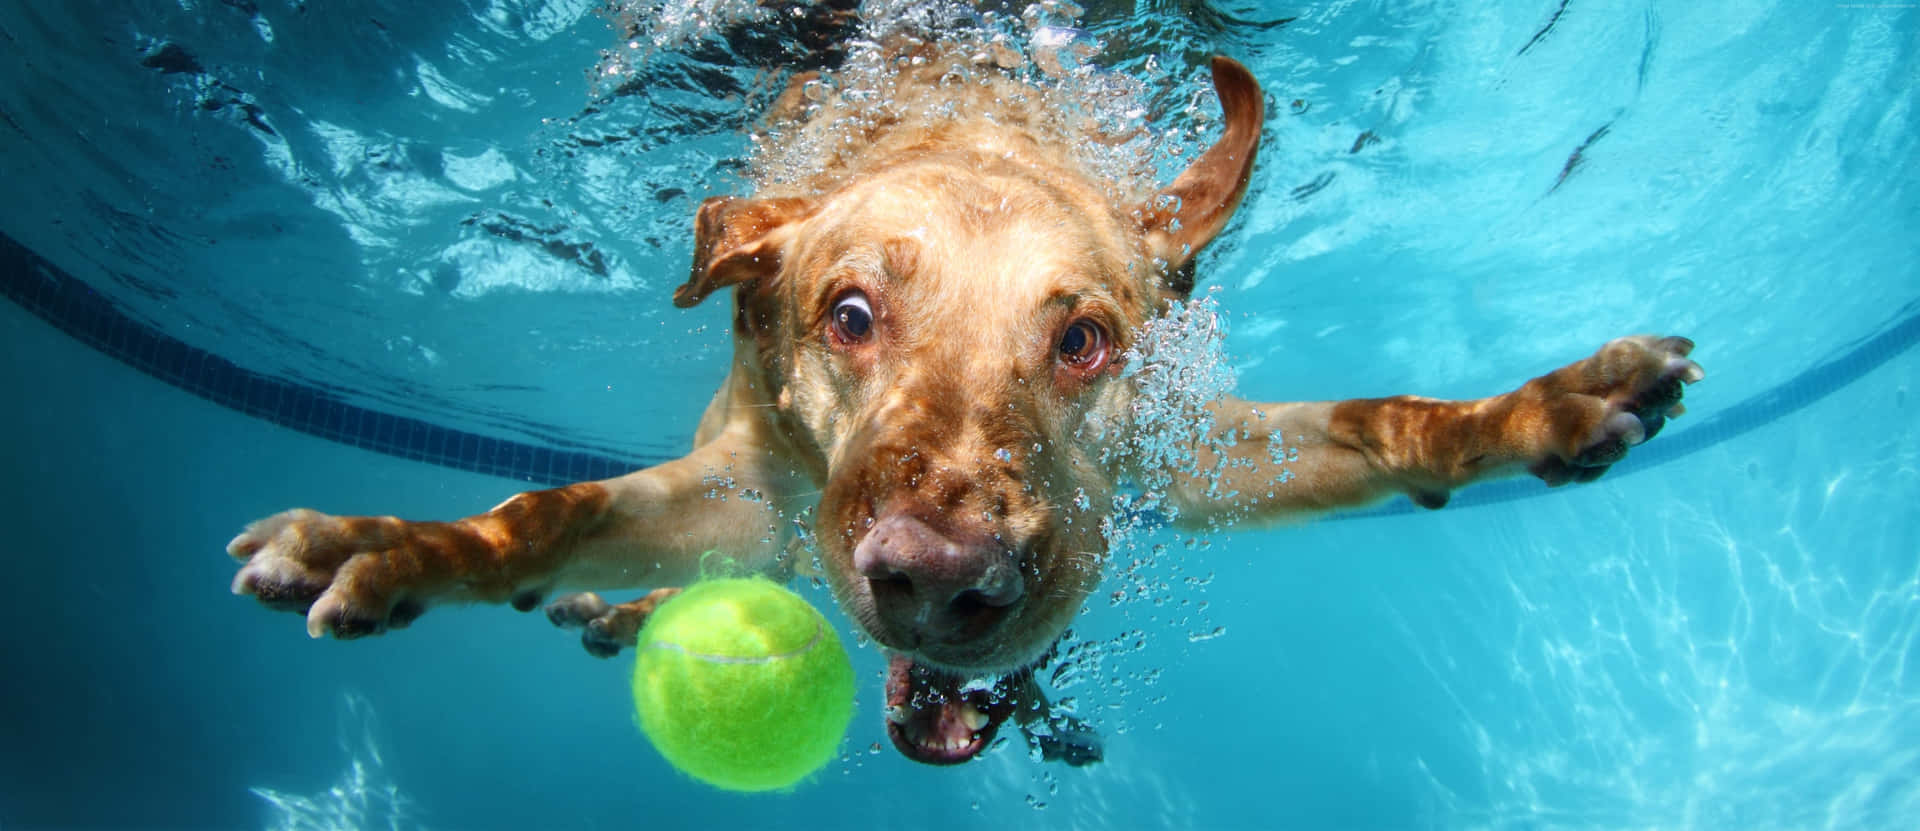 Funny Dog Underwater With Ball Background